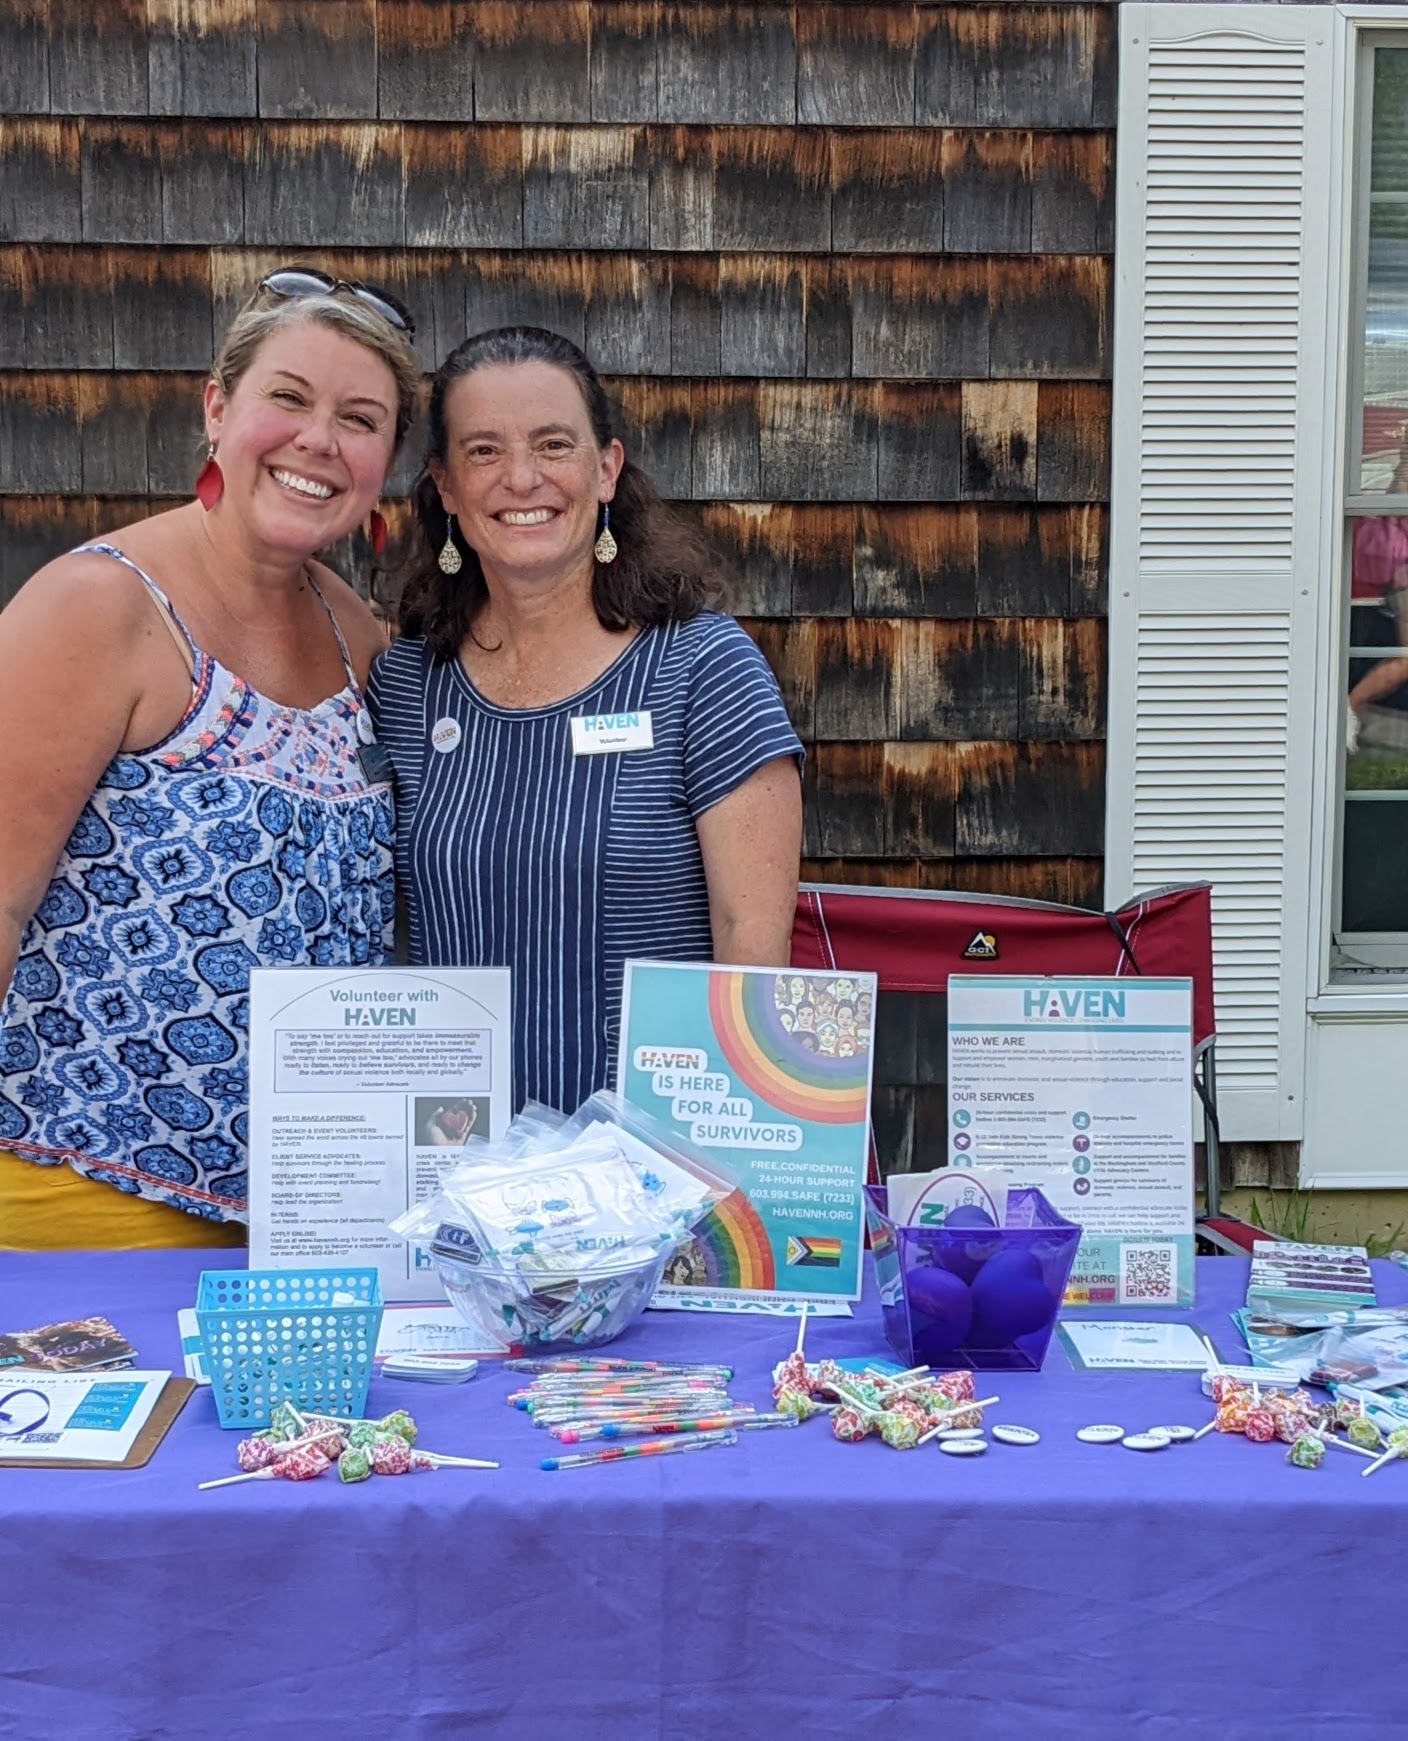 Image description: Two women smiling behind a HAVEN table showing HAVEN swag like pens, information about HAVEN, and candy.